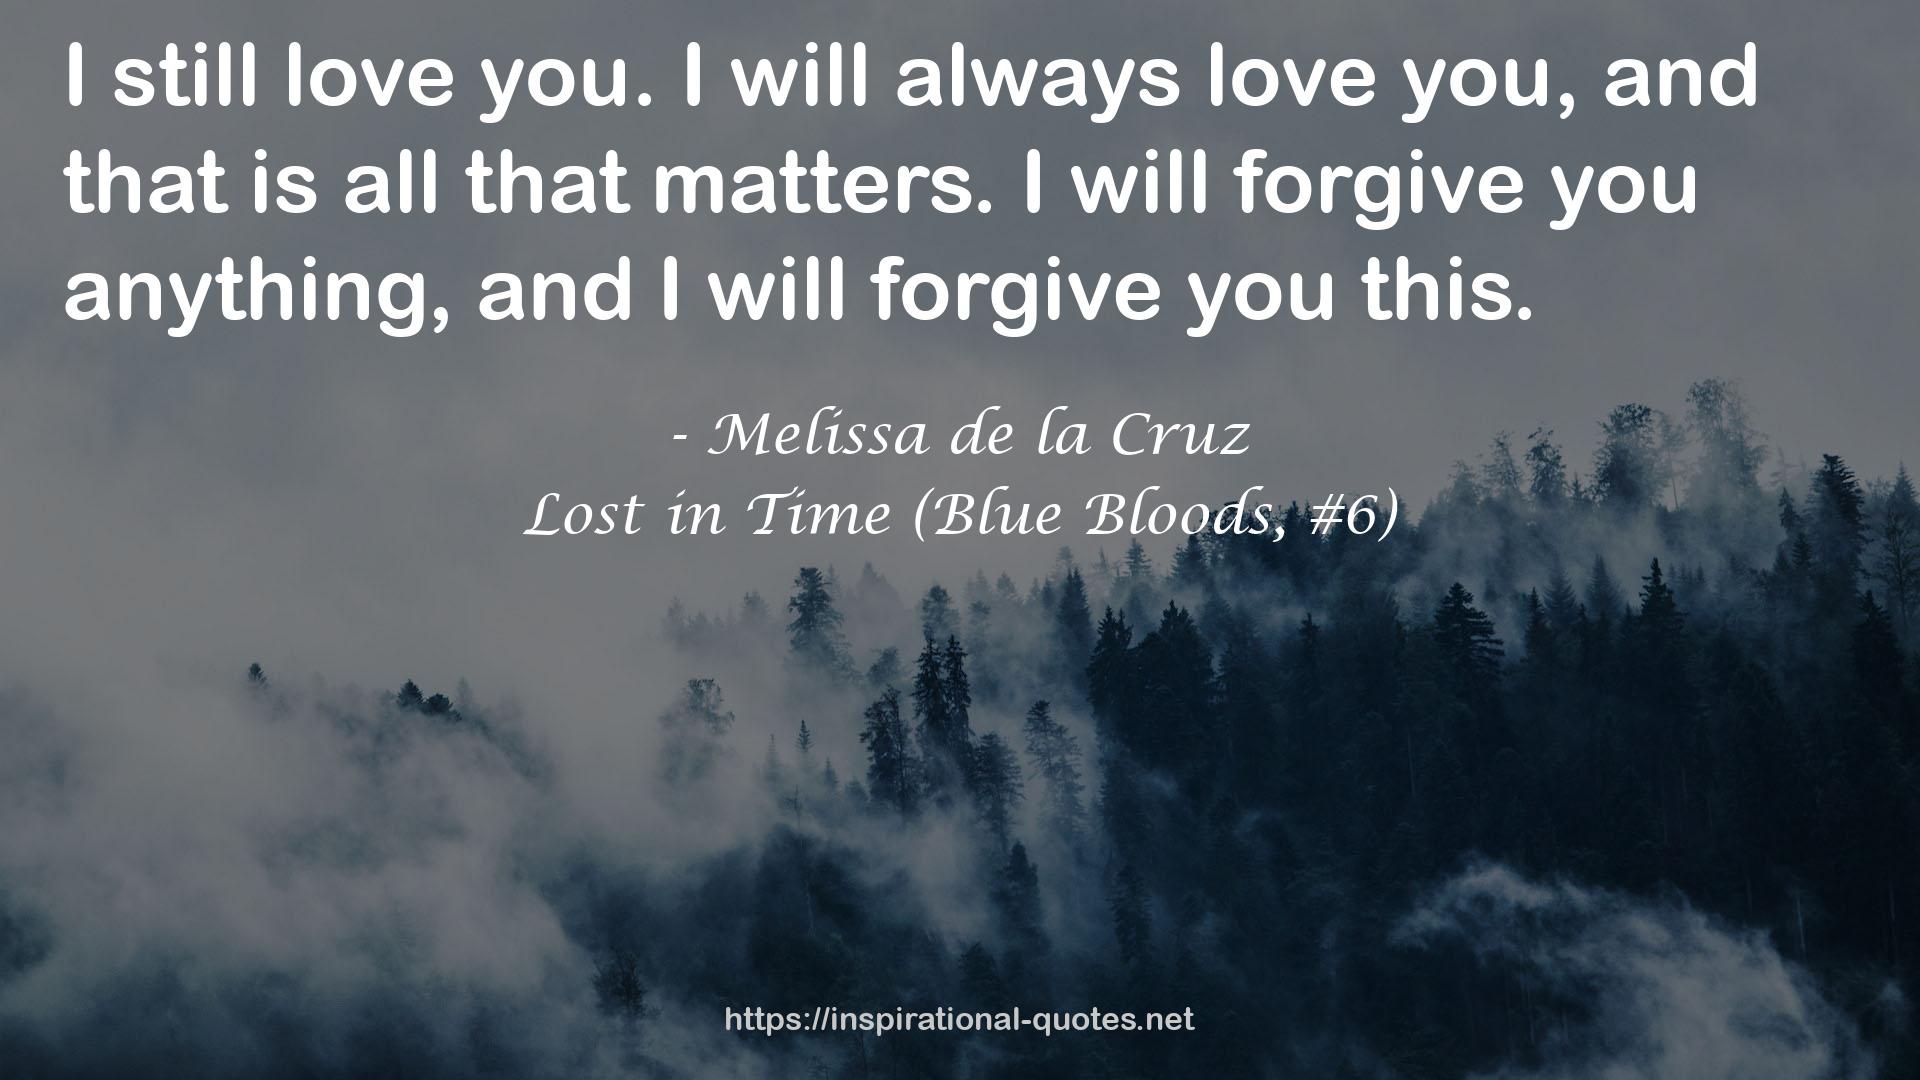 Lost in Time (Blue Bloods, #6) QUOTES